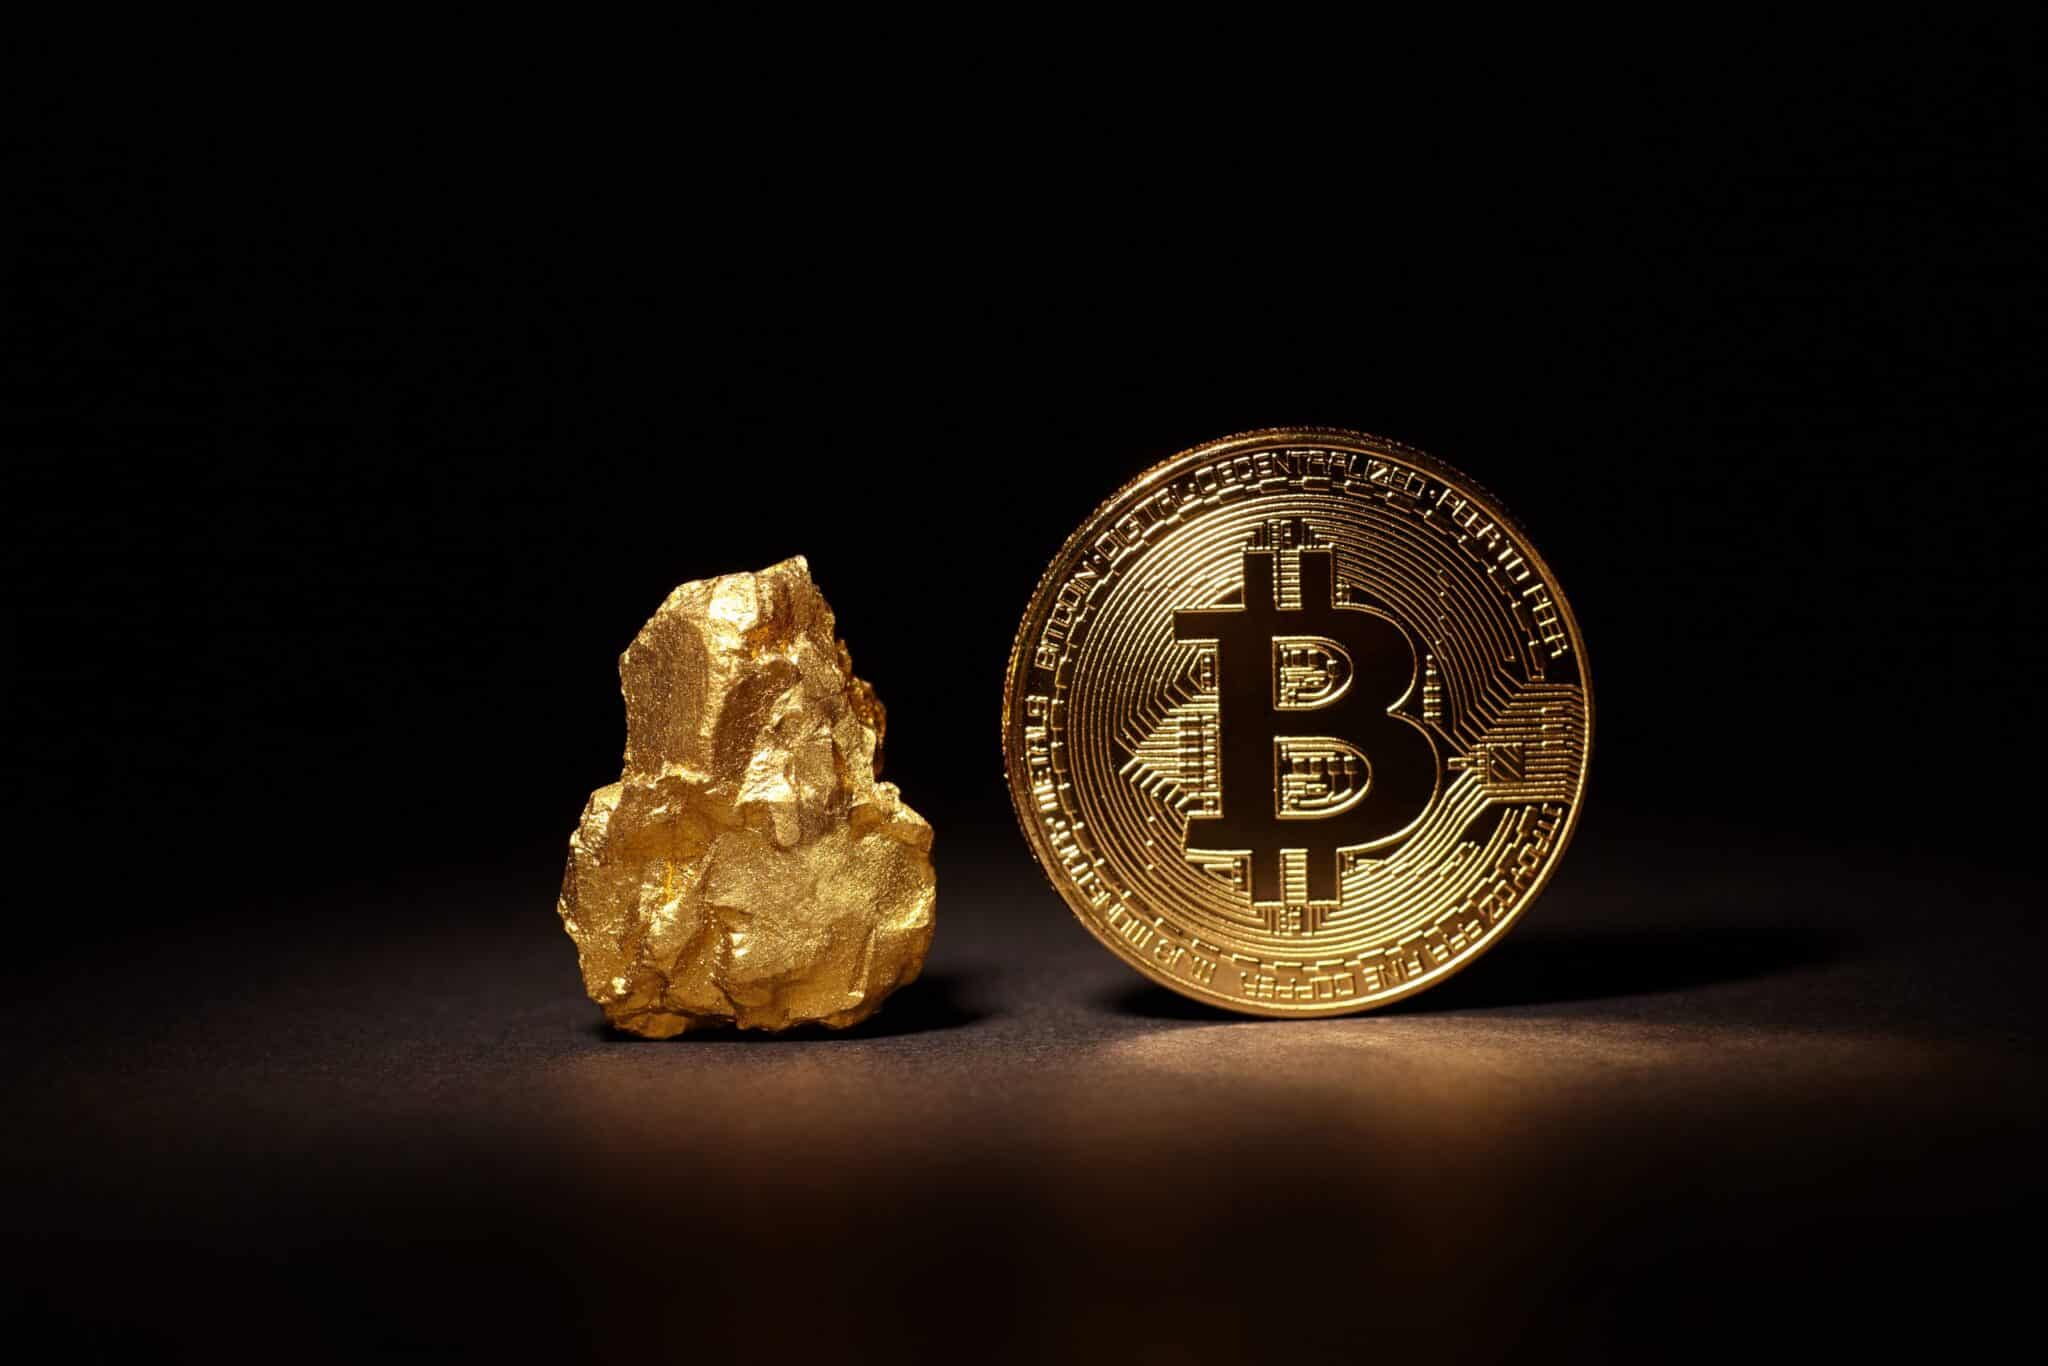 Gold and BTC